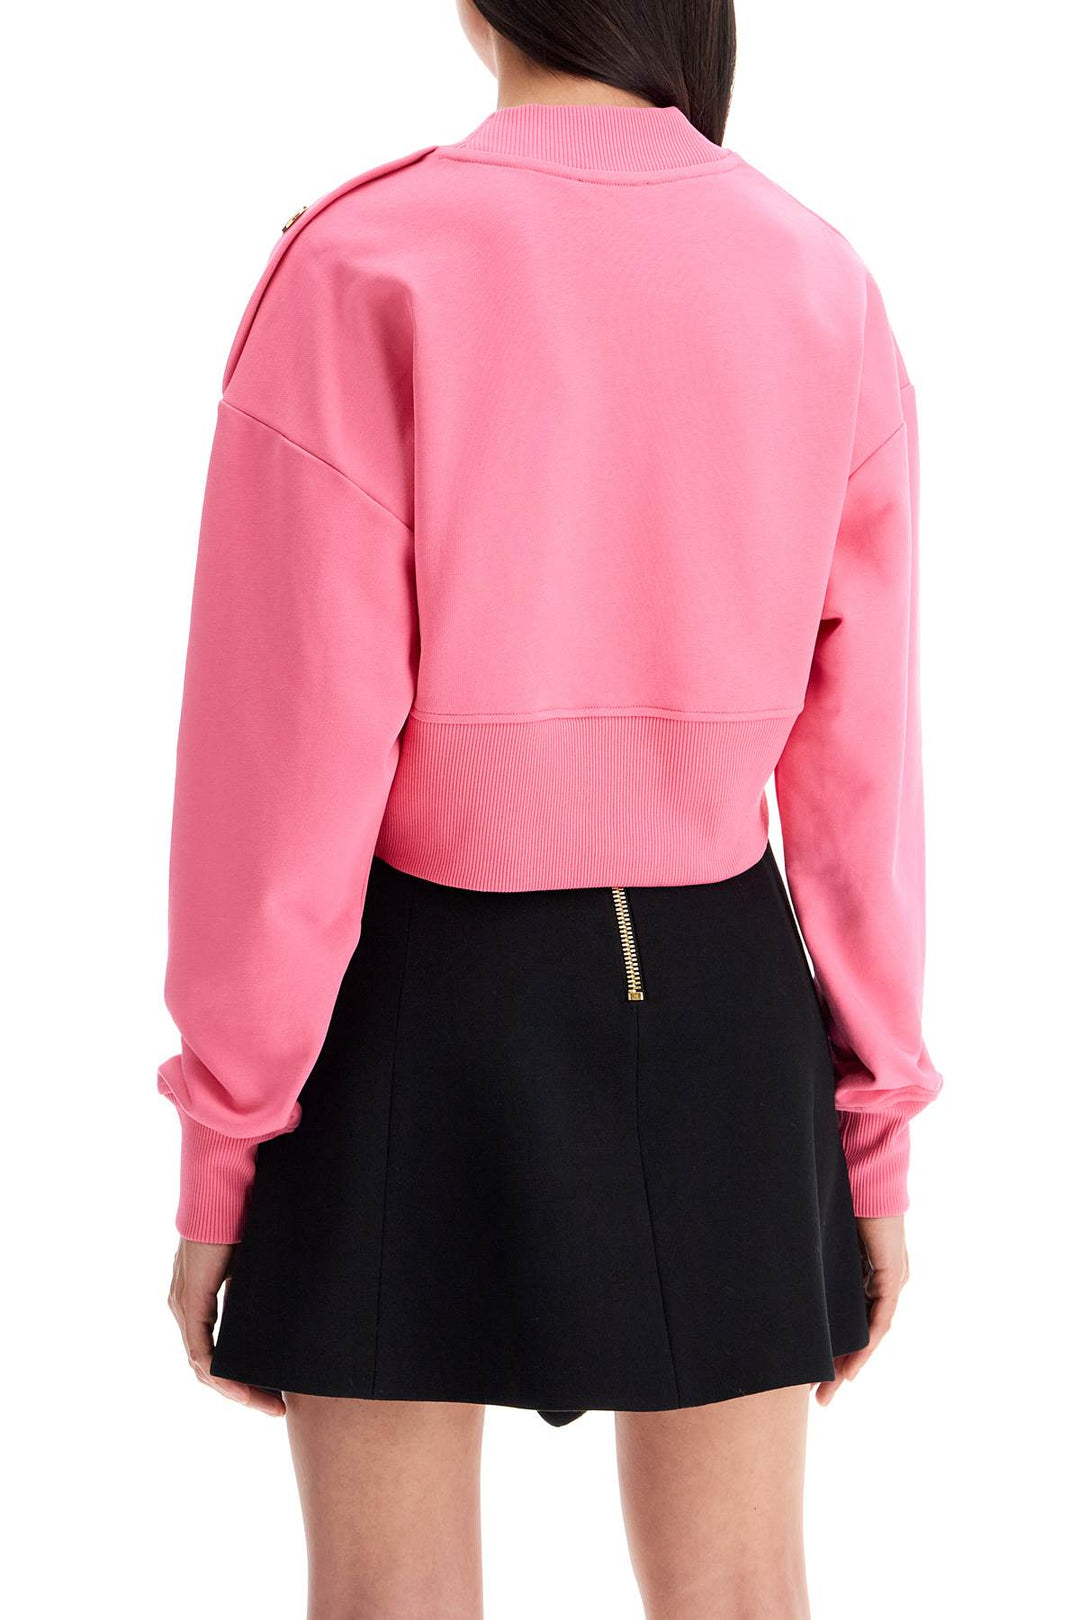 Balmain Cropped Sweatshirt With Buttons   Pink